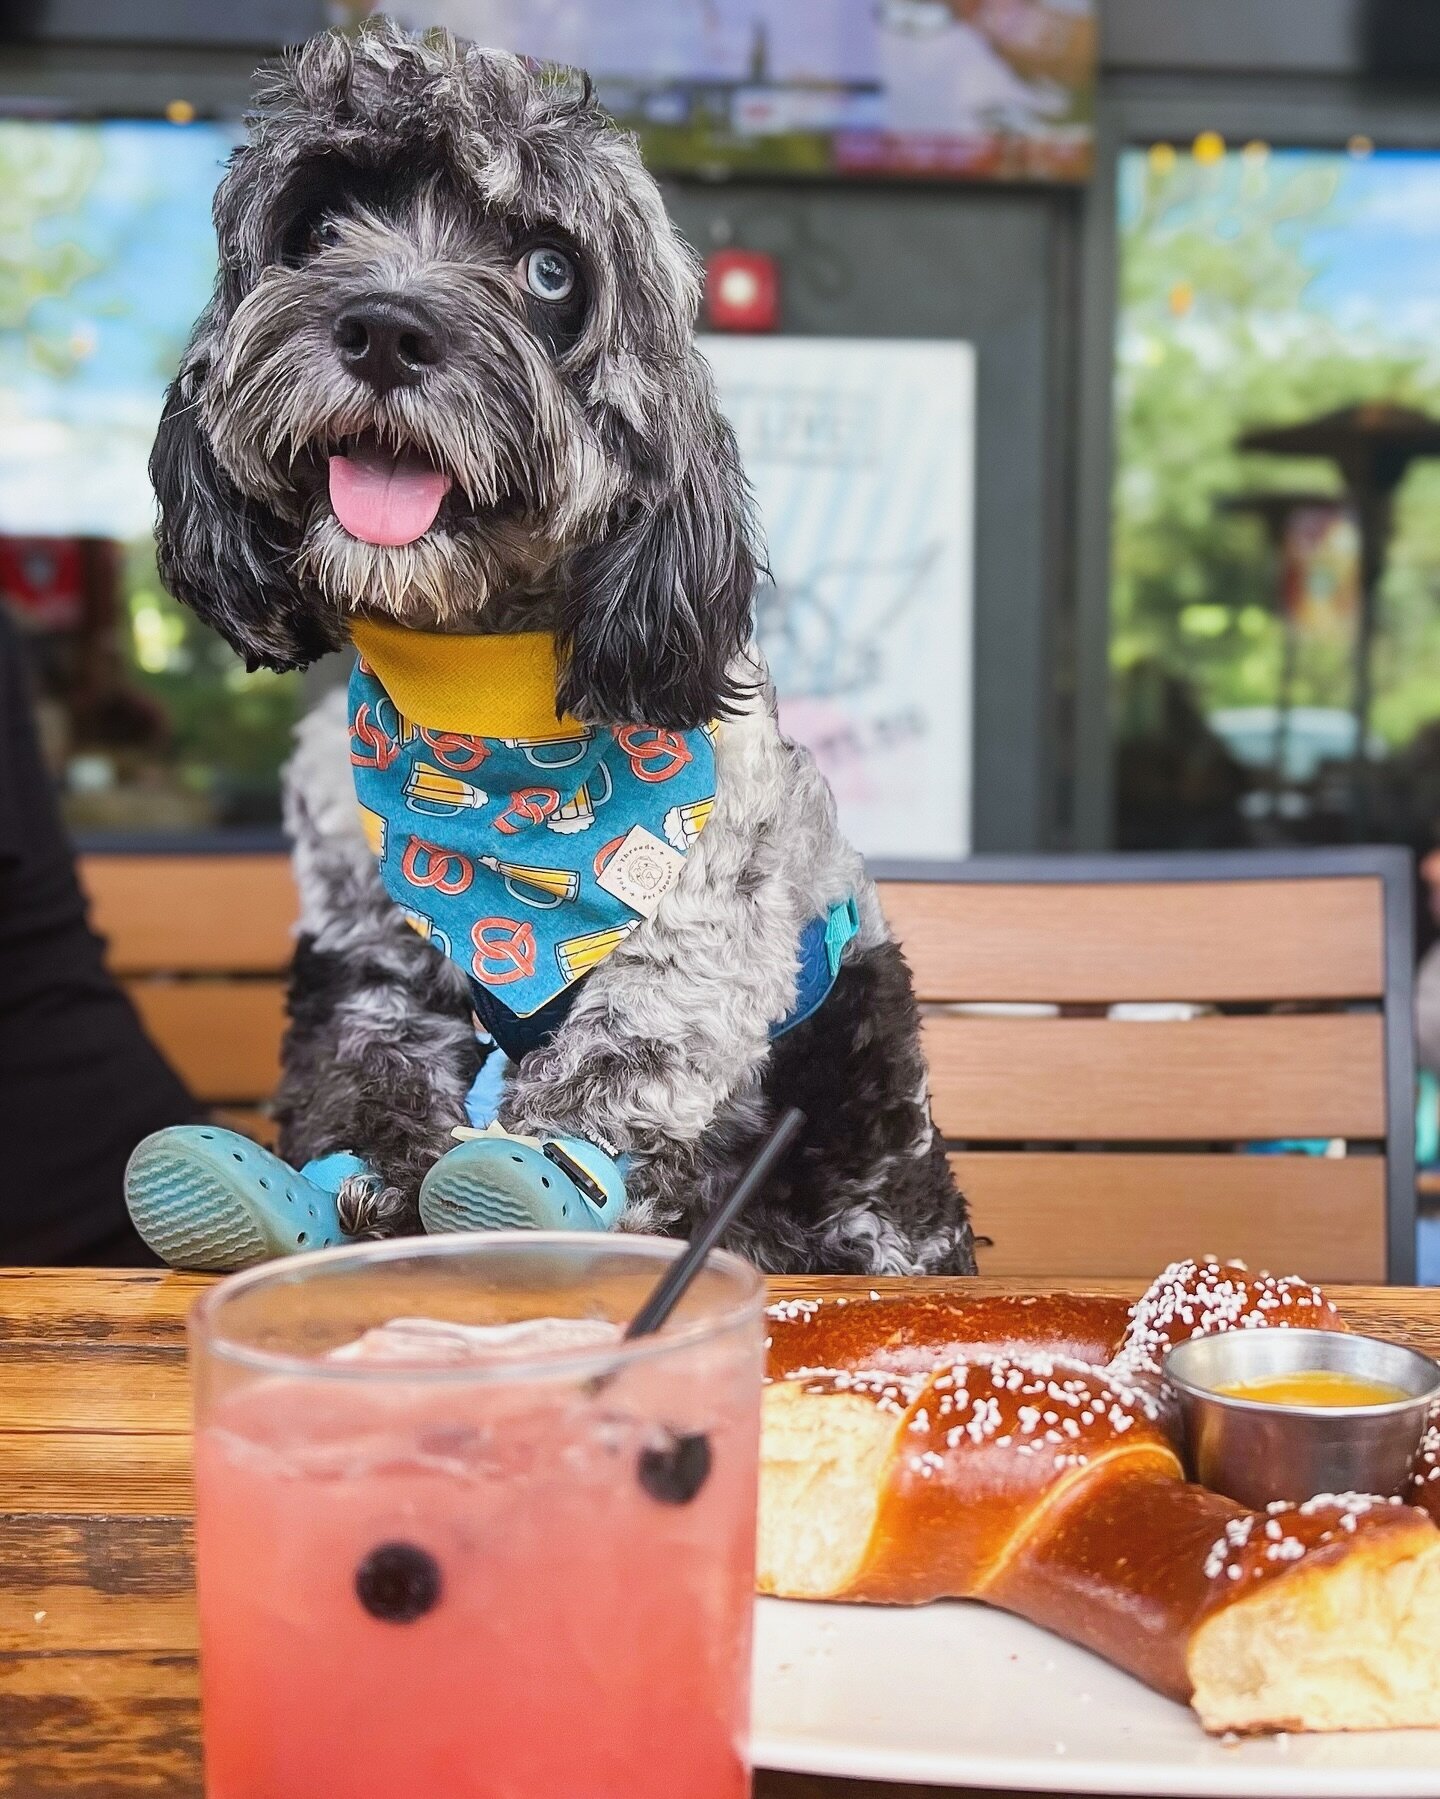 Drop a 🍺🥨 emoji in the comments if you think our furriend Obi looks super handsome! 

He&rsquo;s wearing the new Beer and Pretzels bandana in size Small